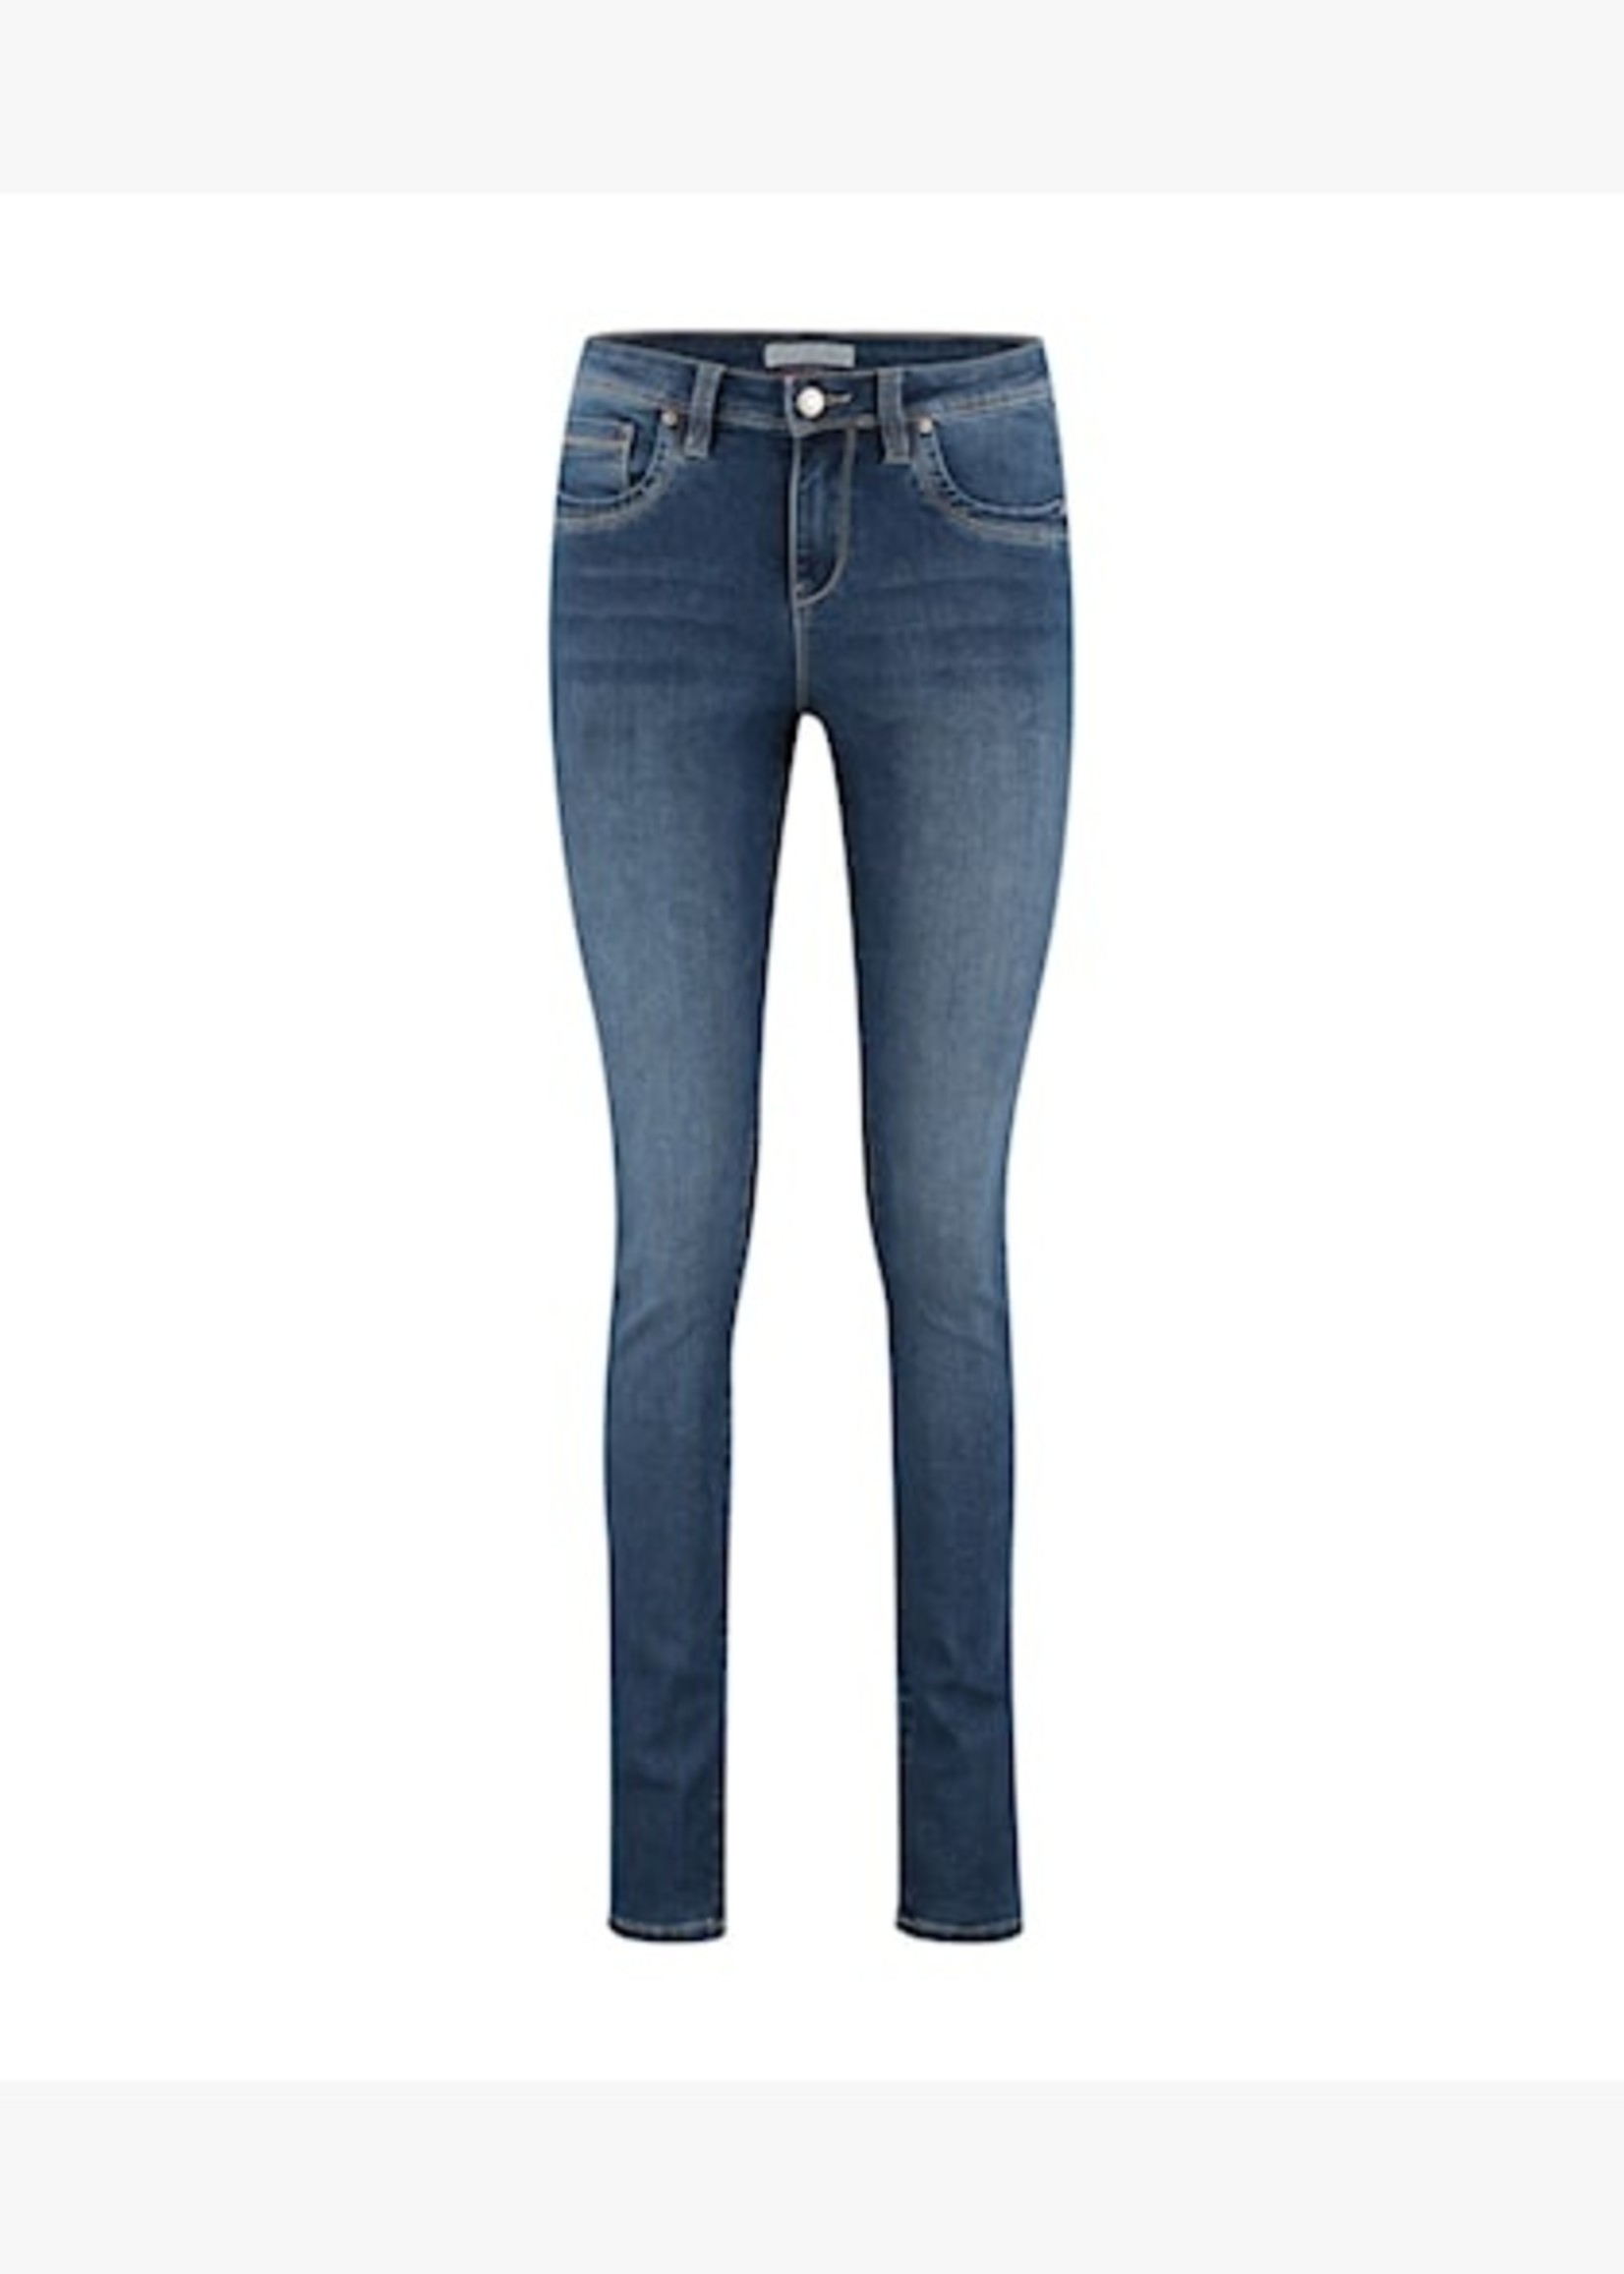 Red Button Jeans Jimmy - Midstone Used